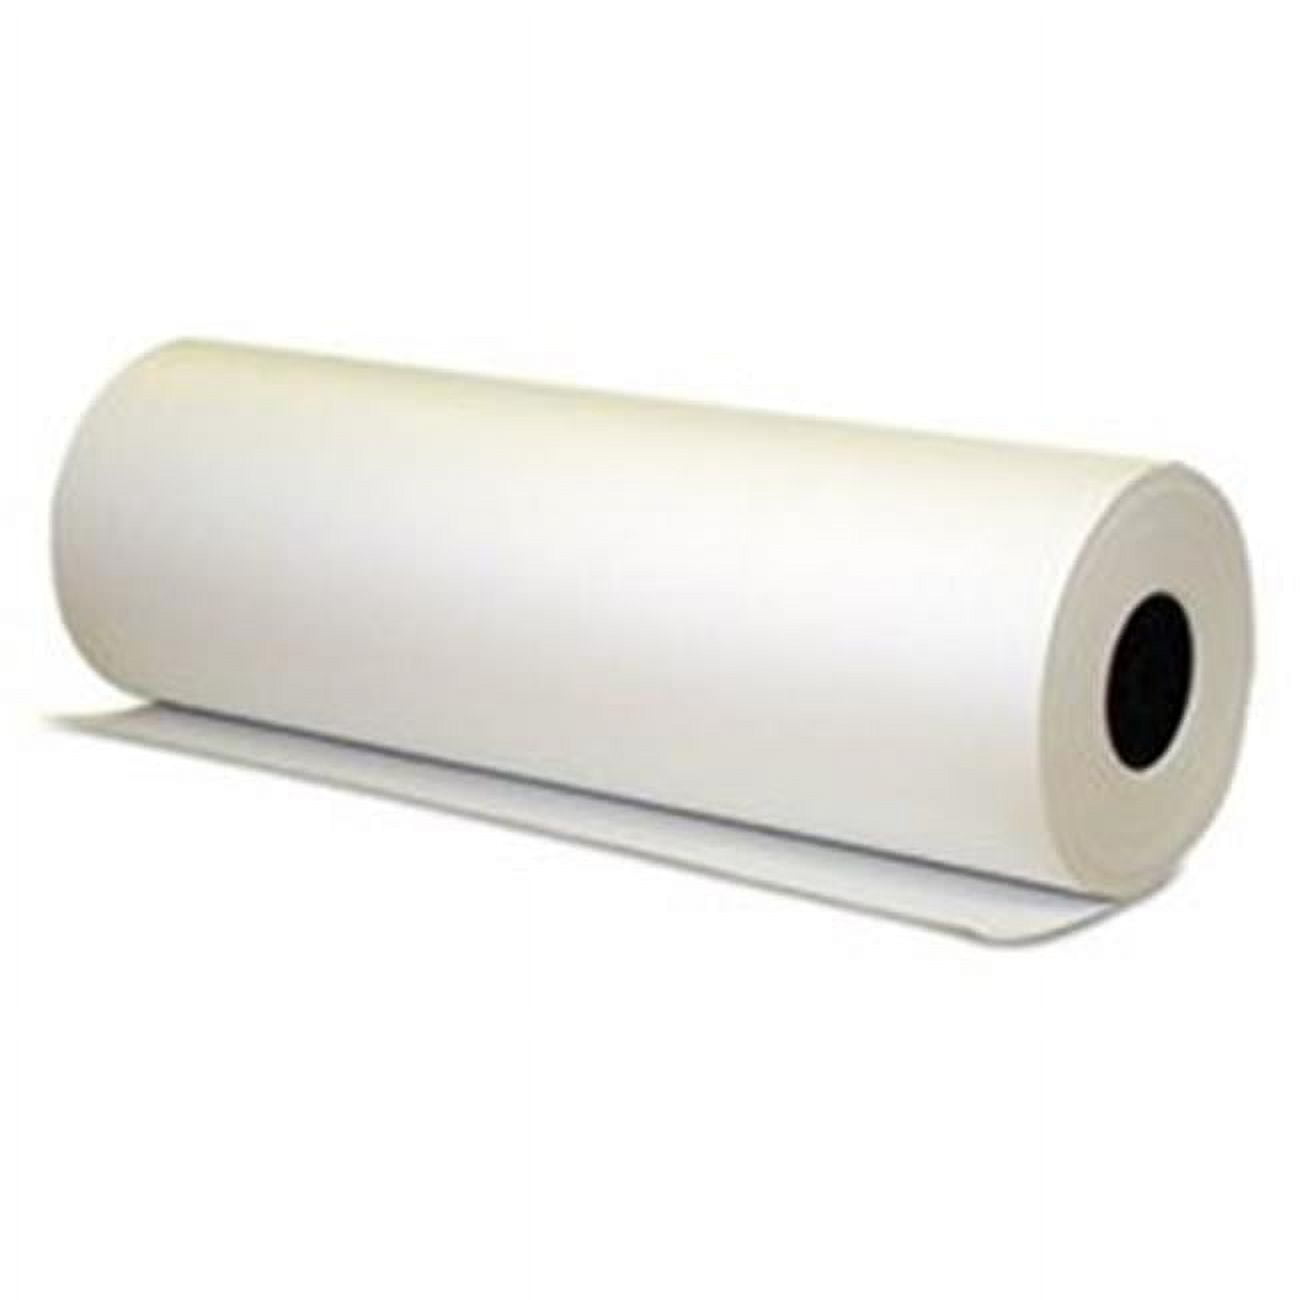 Wb15-40 15 In. X 720 Ft. Butcher Paper, White